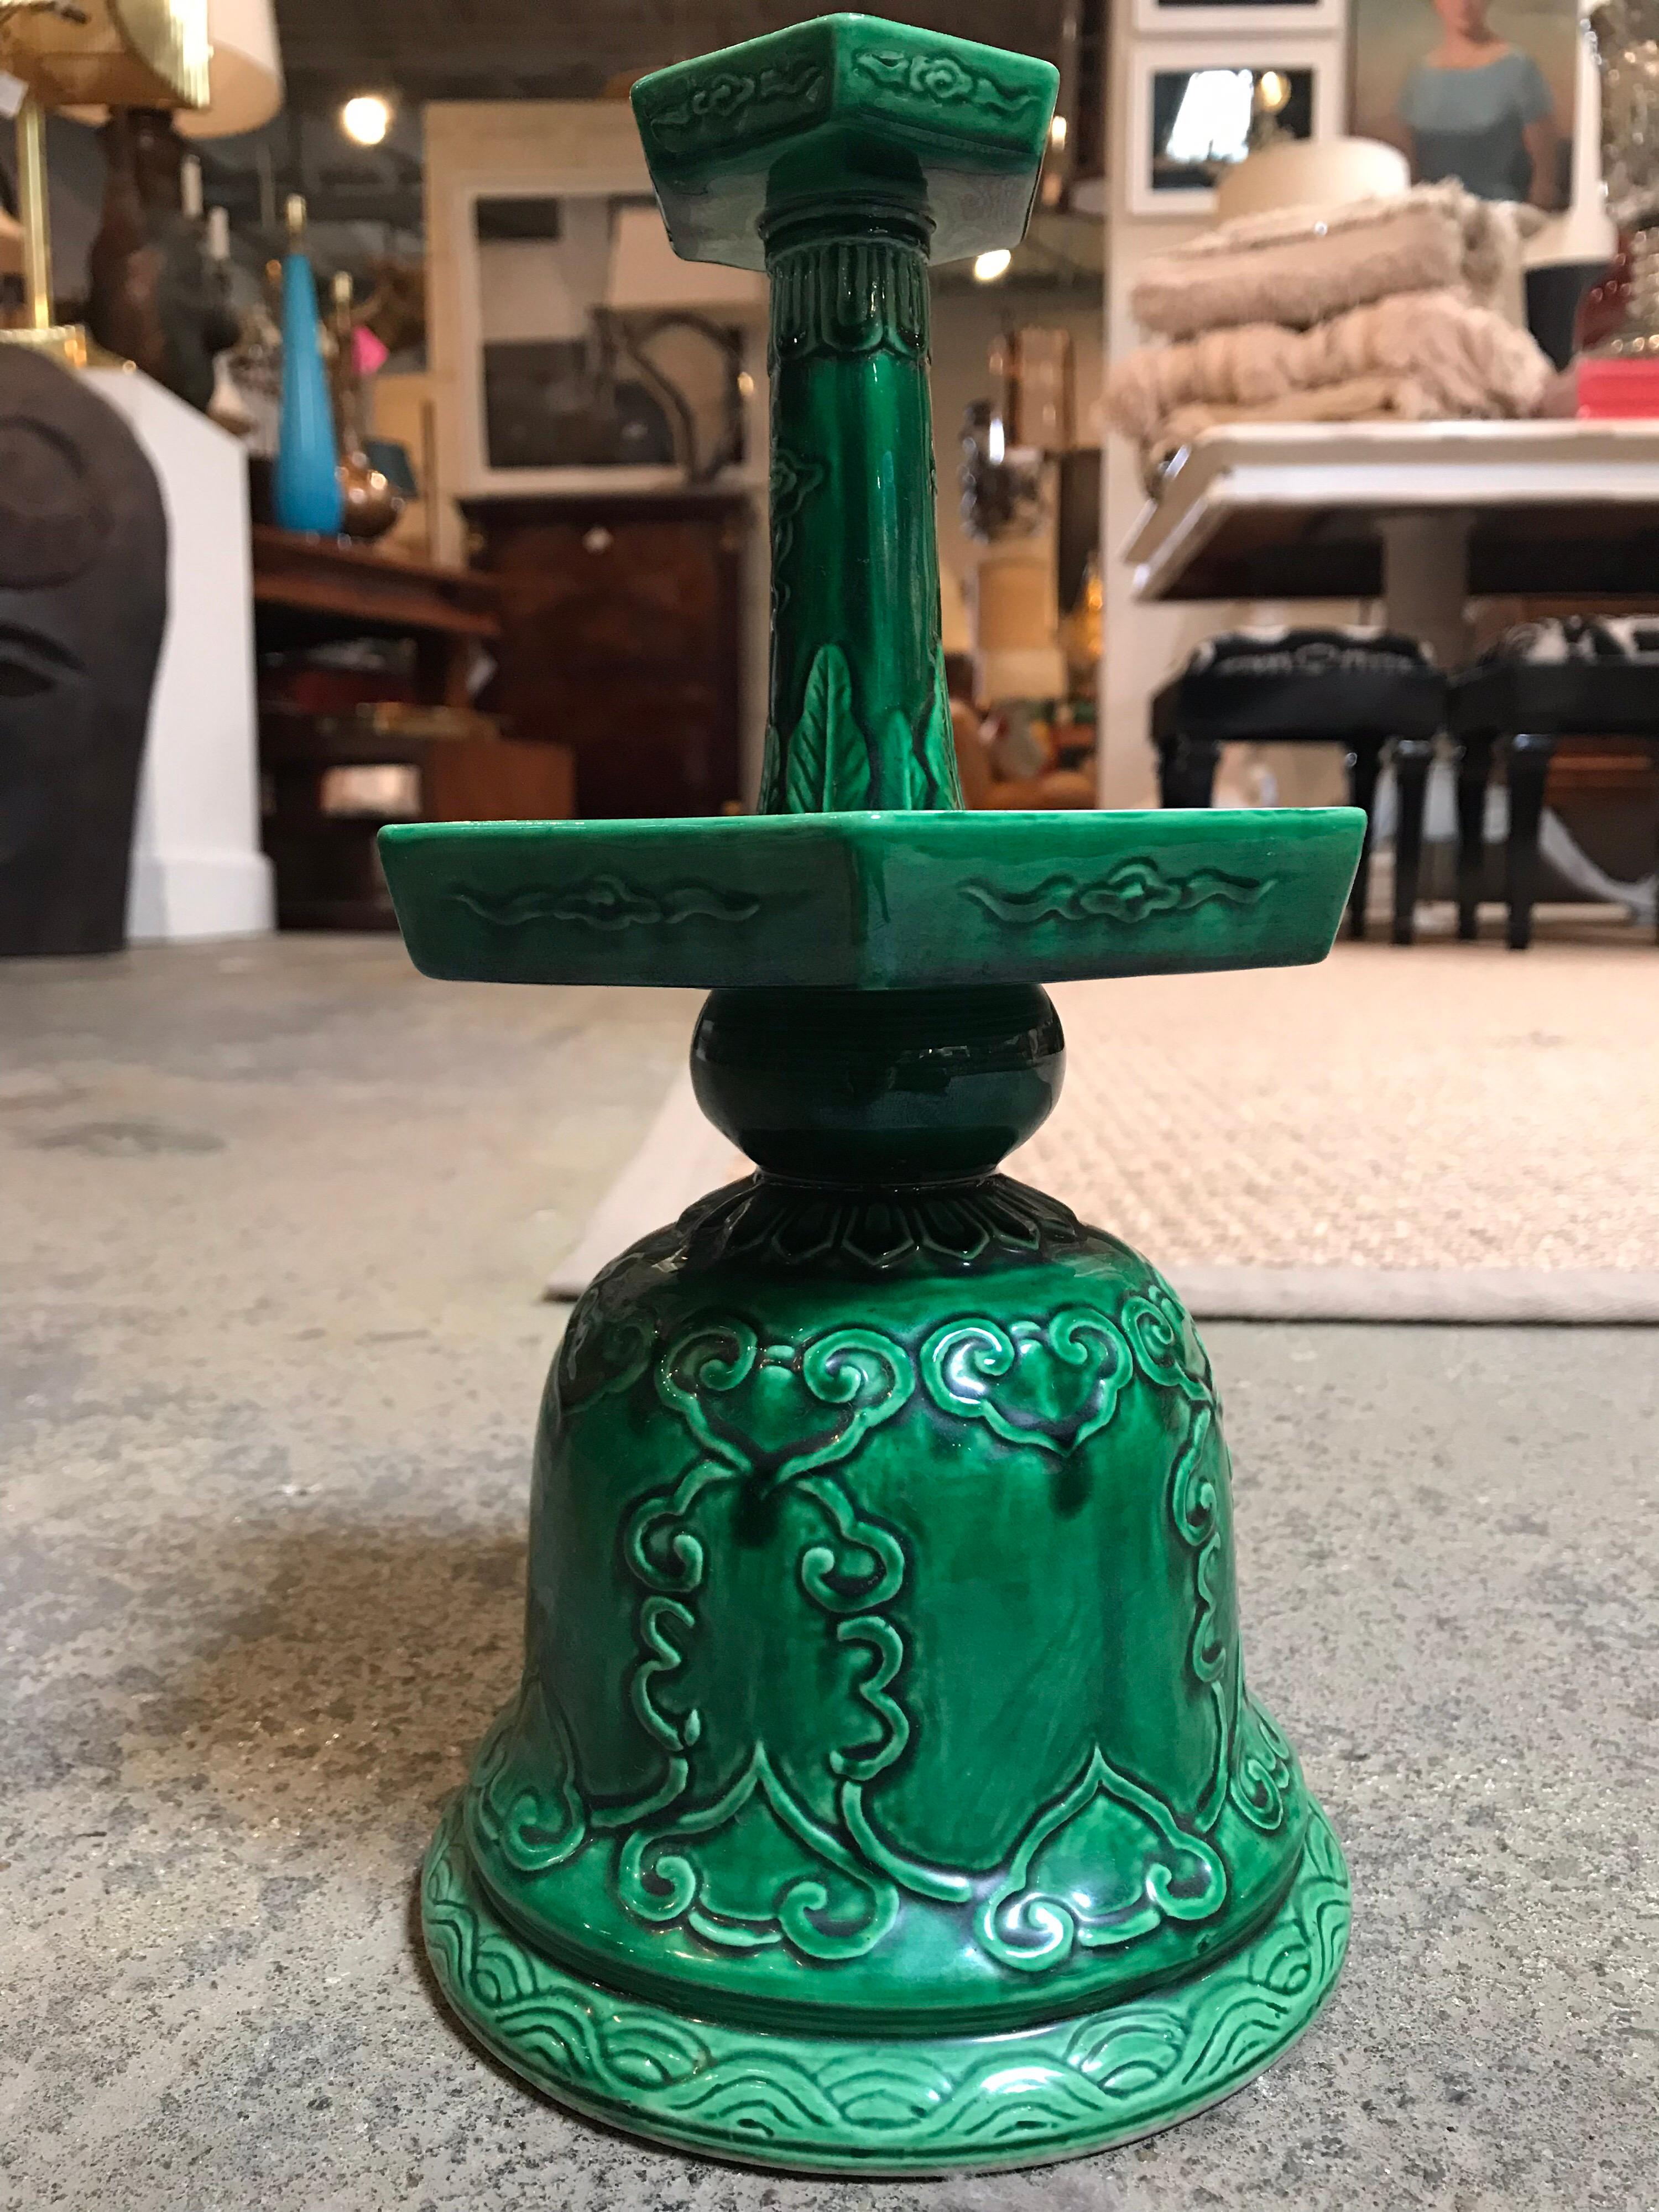 These green ceramic Chinese candlestick holders come in a pair. They are glazed and include several interesting handmade designs and patterns along the surface. There is also a 